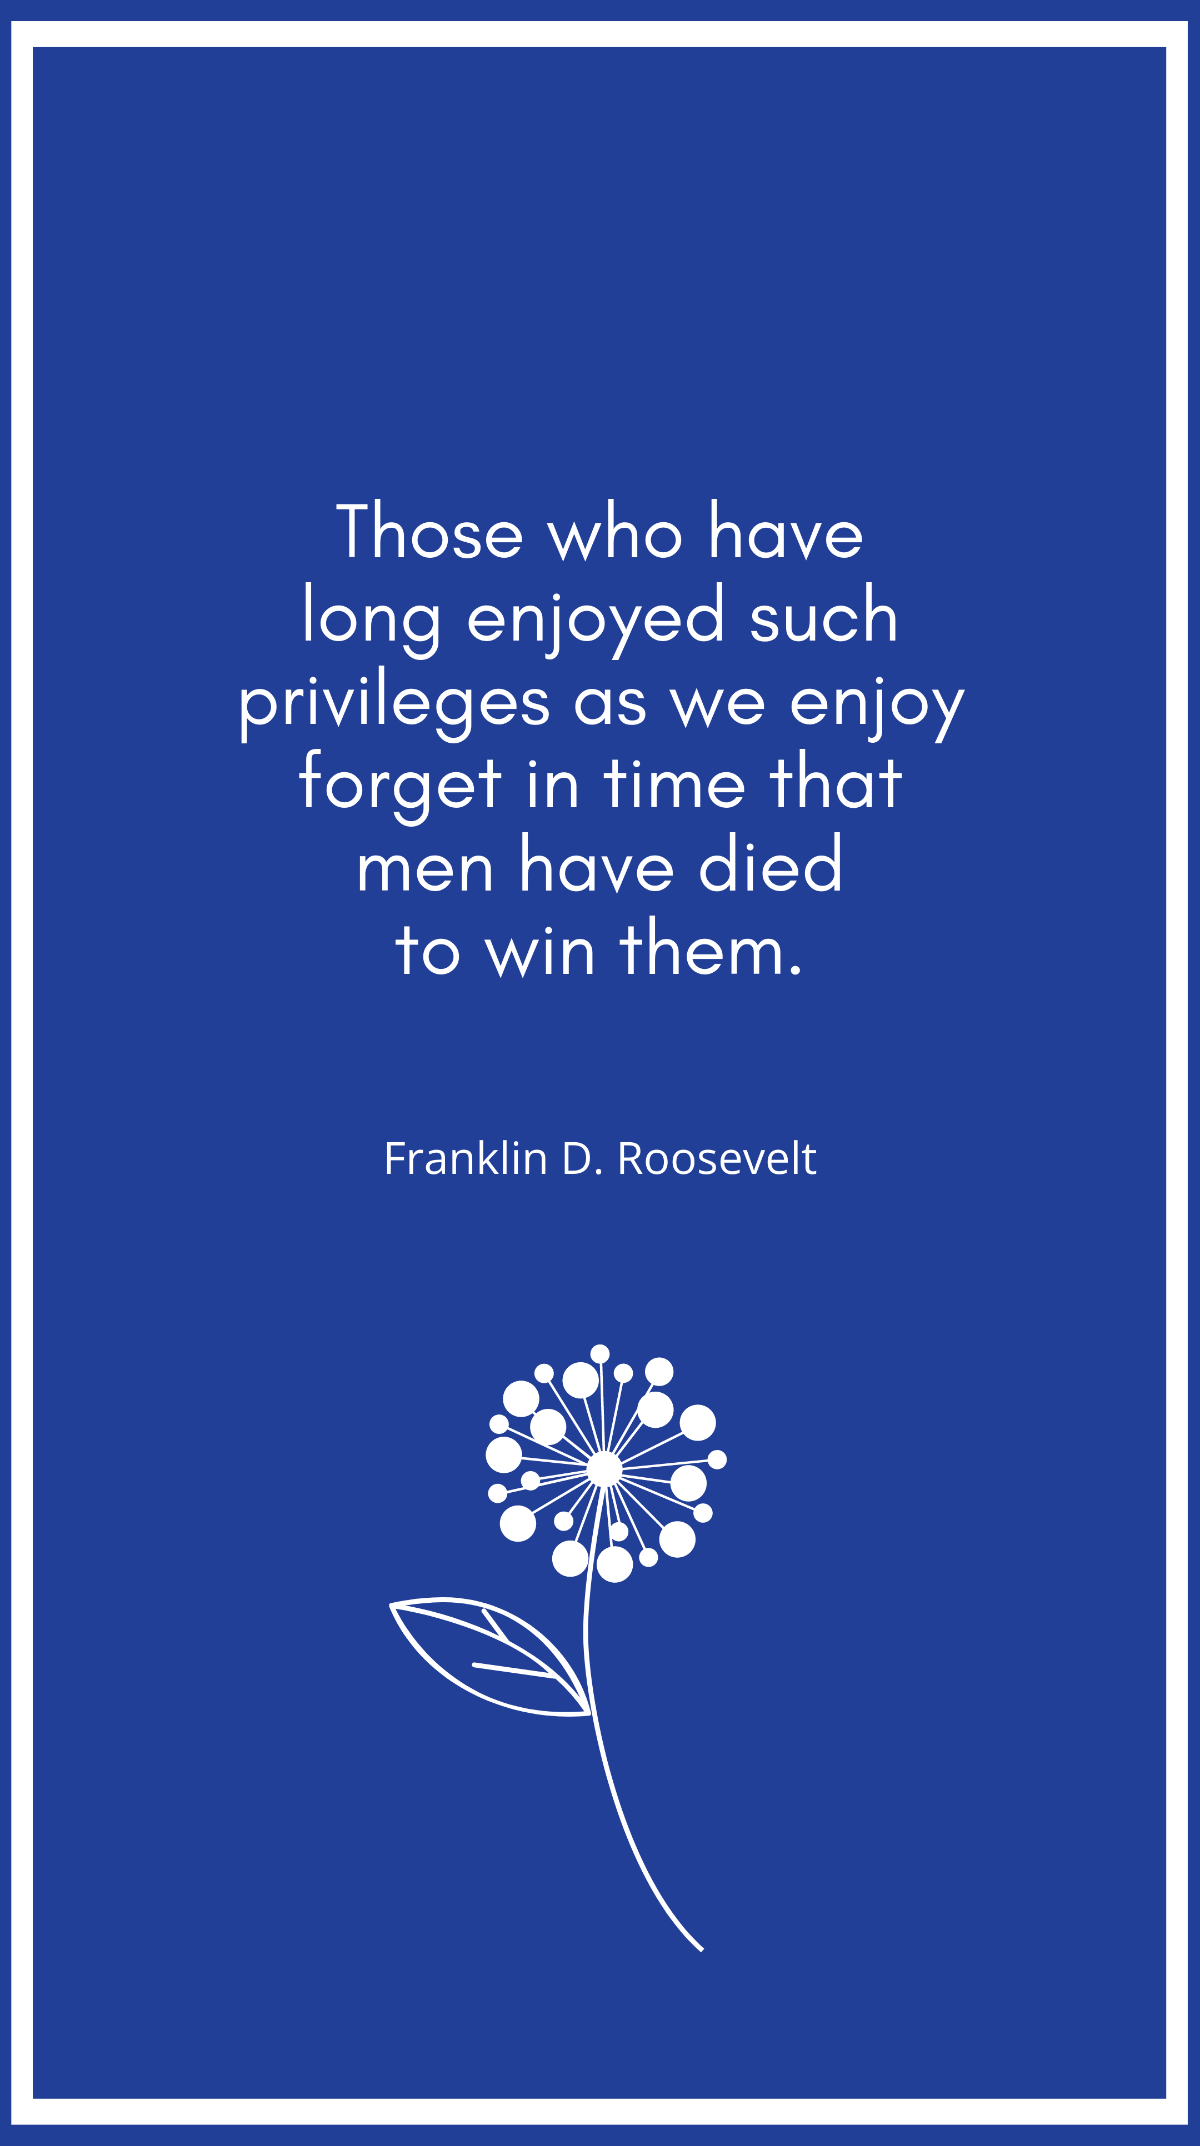 Franklin D. Roosevelt - Those who have long enjoyed such privileges as we enjoy forget in time that men have died to win them. Template